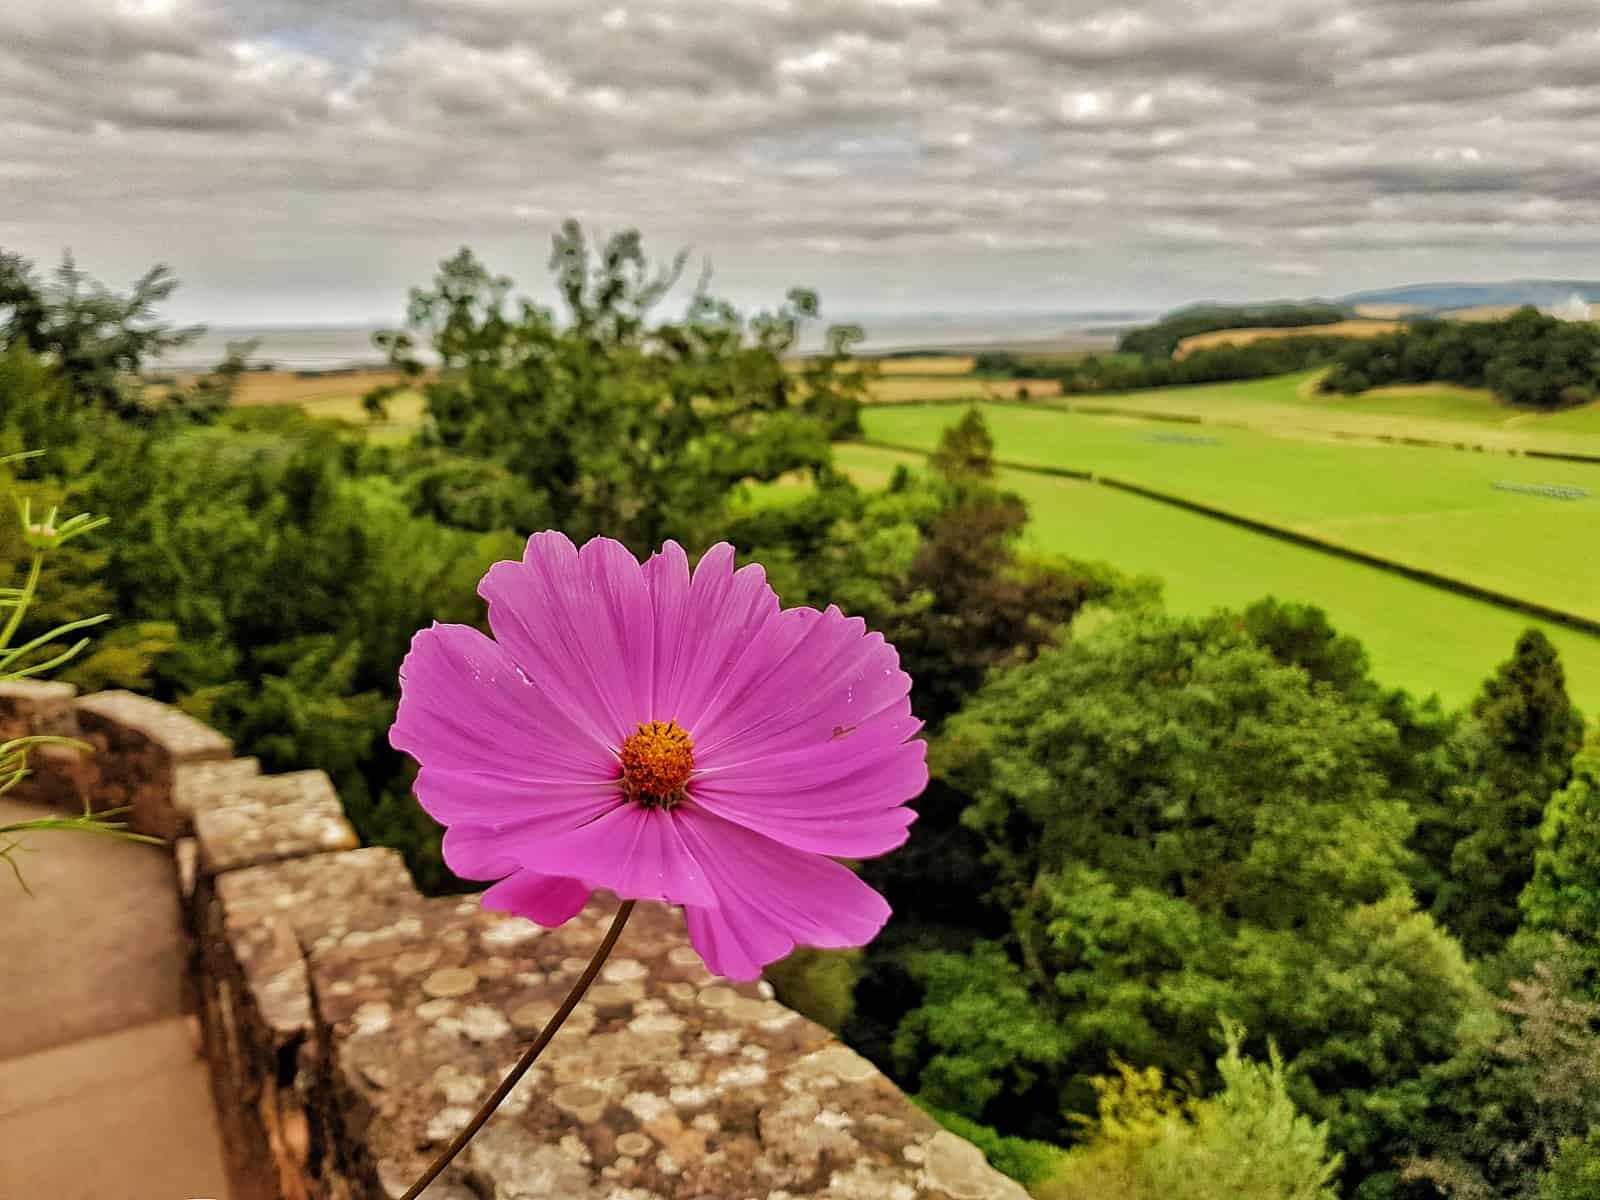 View from Dunster castle with pink flower in foreground